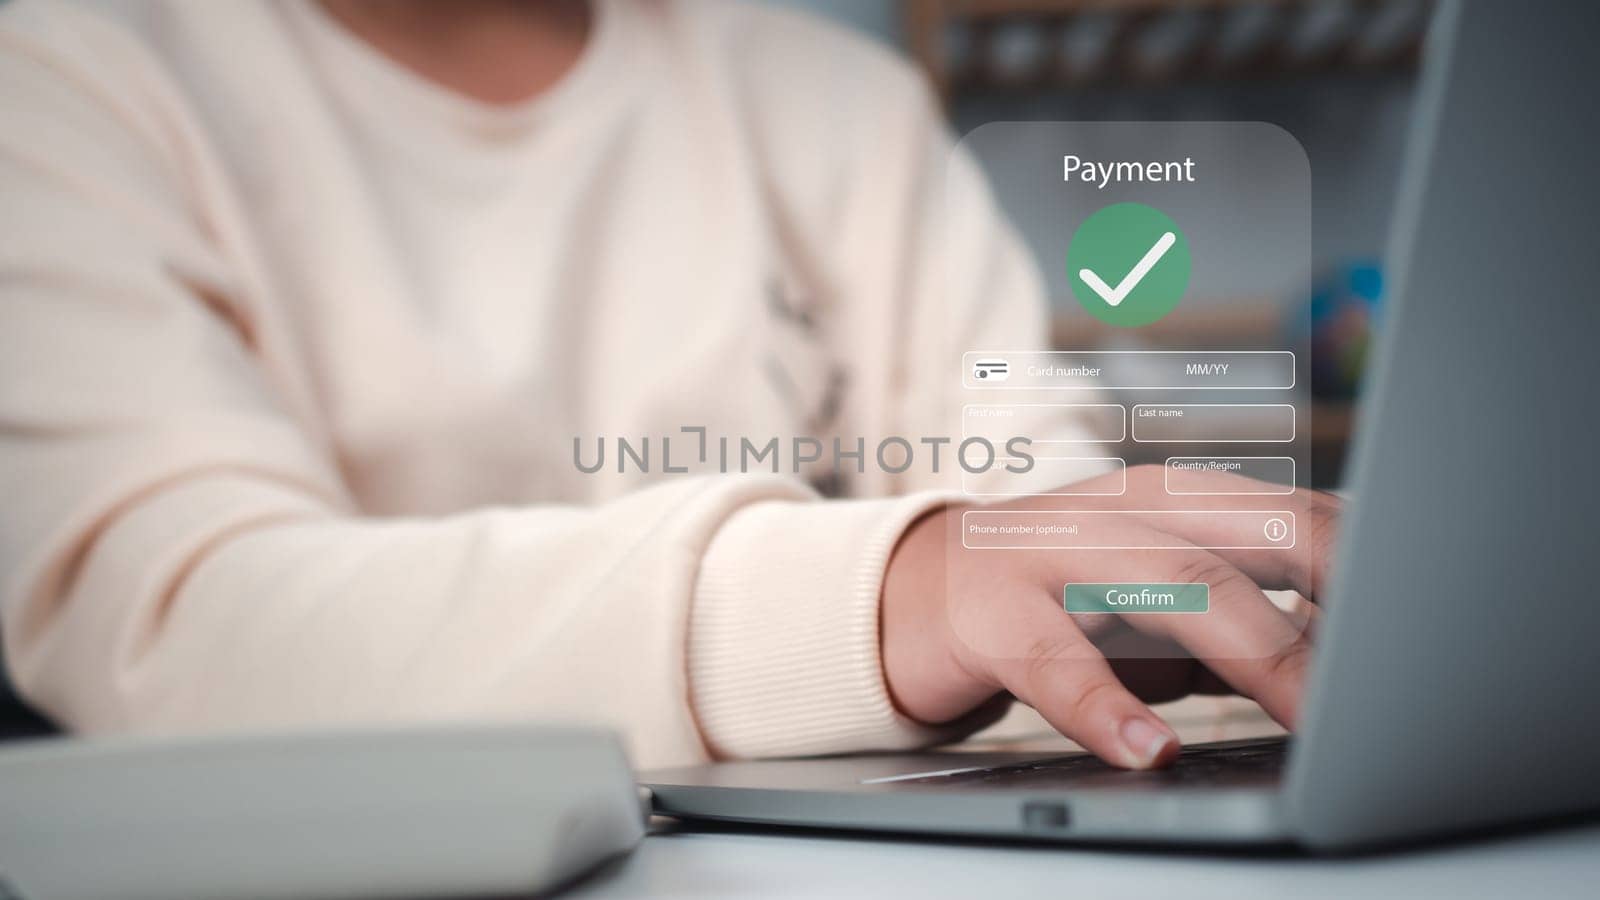 Business people using computer, online payment, banking, online shopping, Digital online payment concept. Technology online banking applications via internet network. financial transaction. by Unimages2527